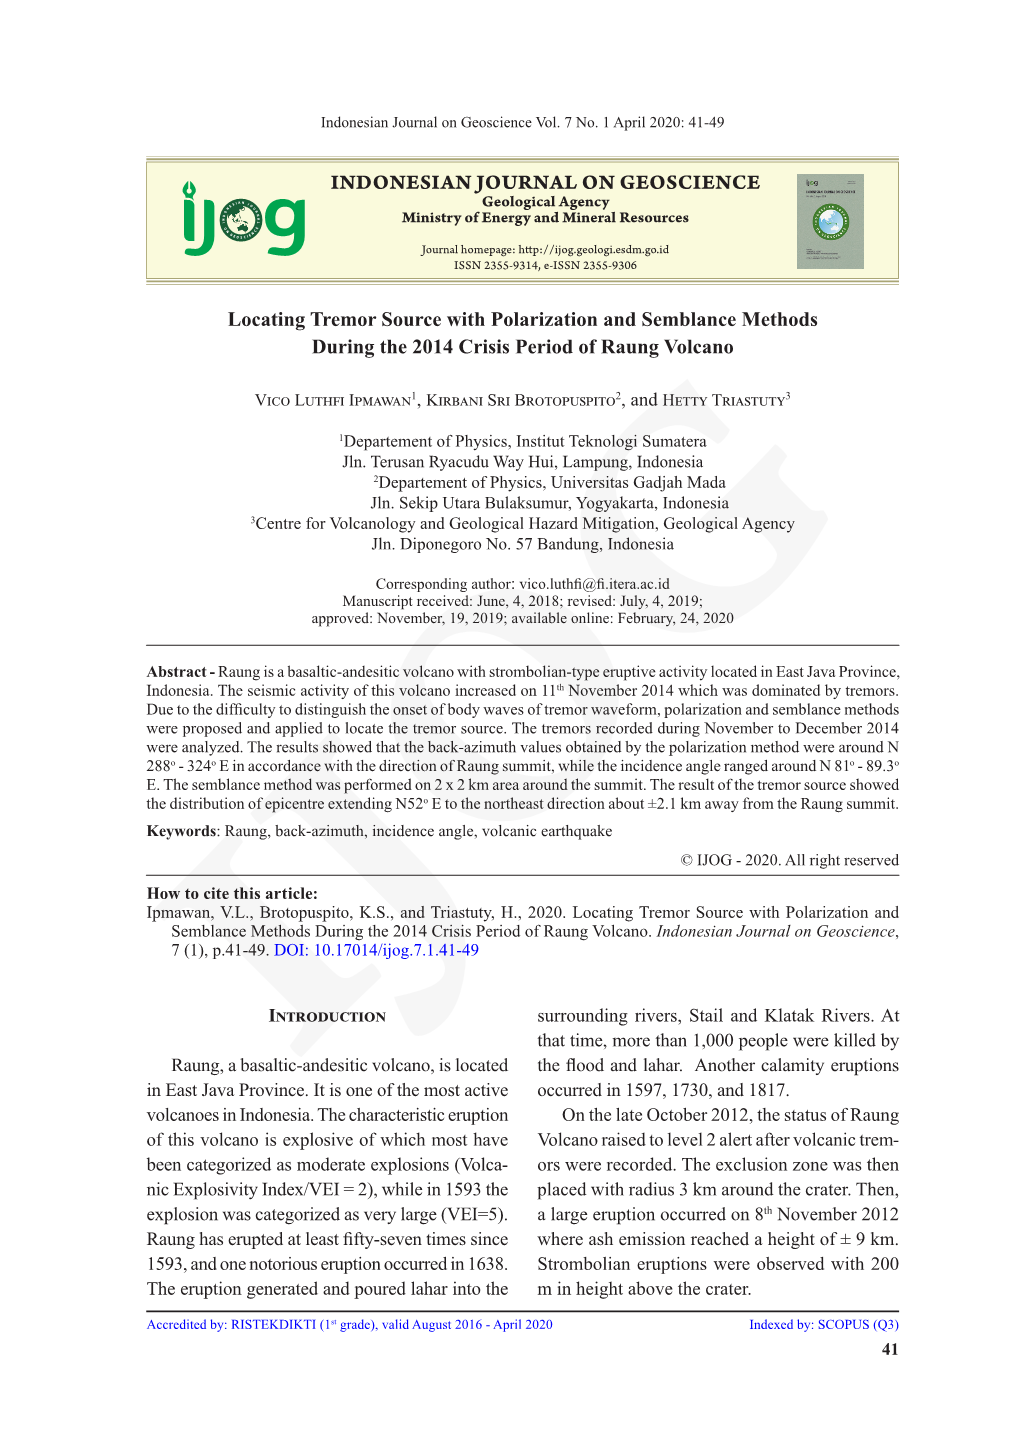 INDONESIAN JOURNAL on GEOSCIENCE Locating Tremor Source with Polarization and Semblance Methods During the 2014 Crisis Period Of